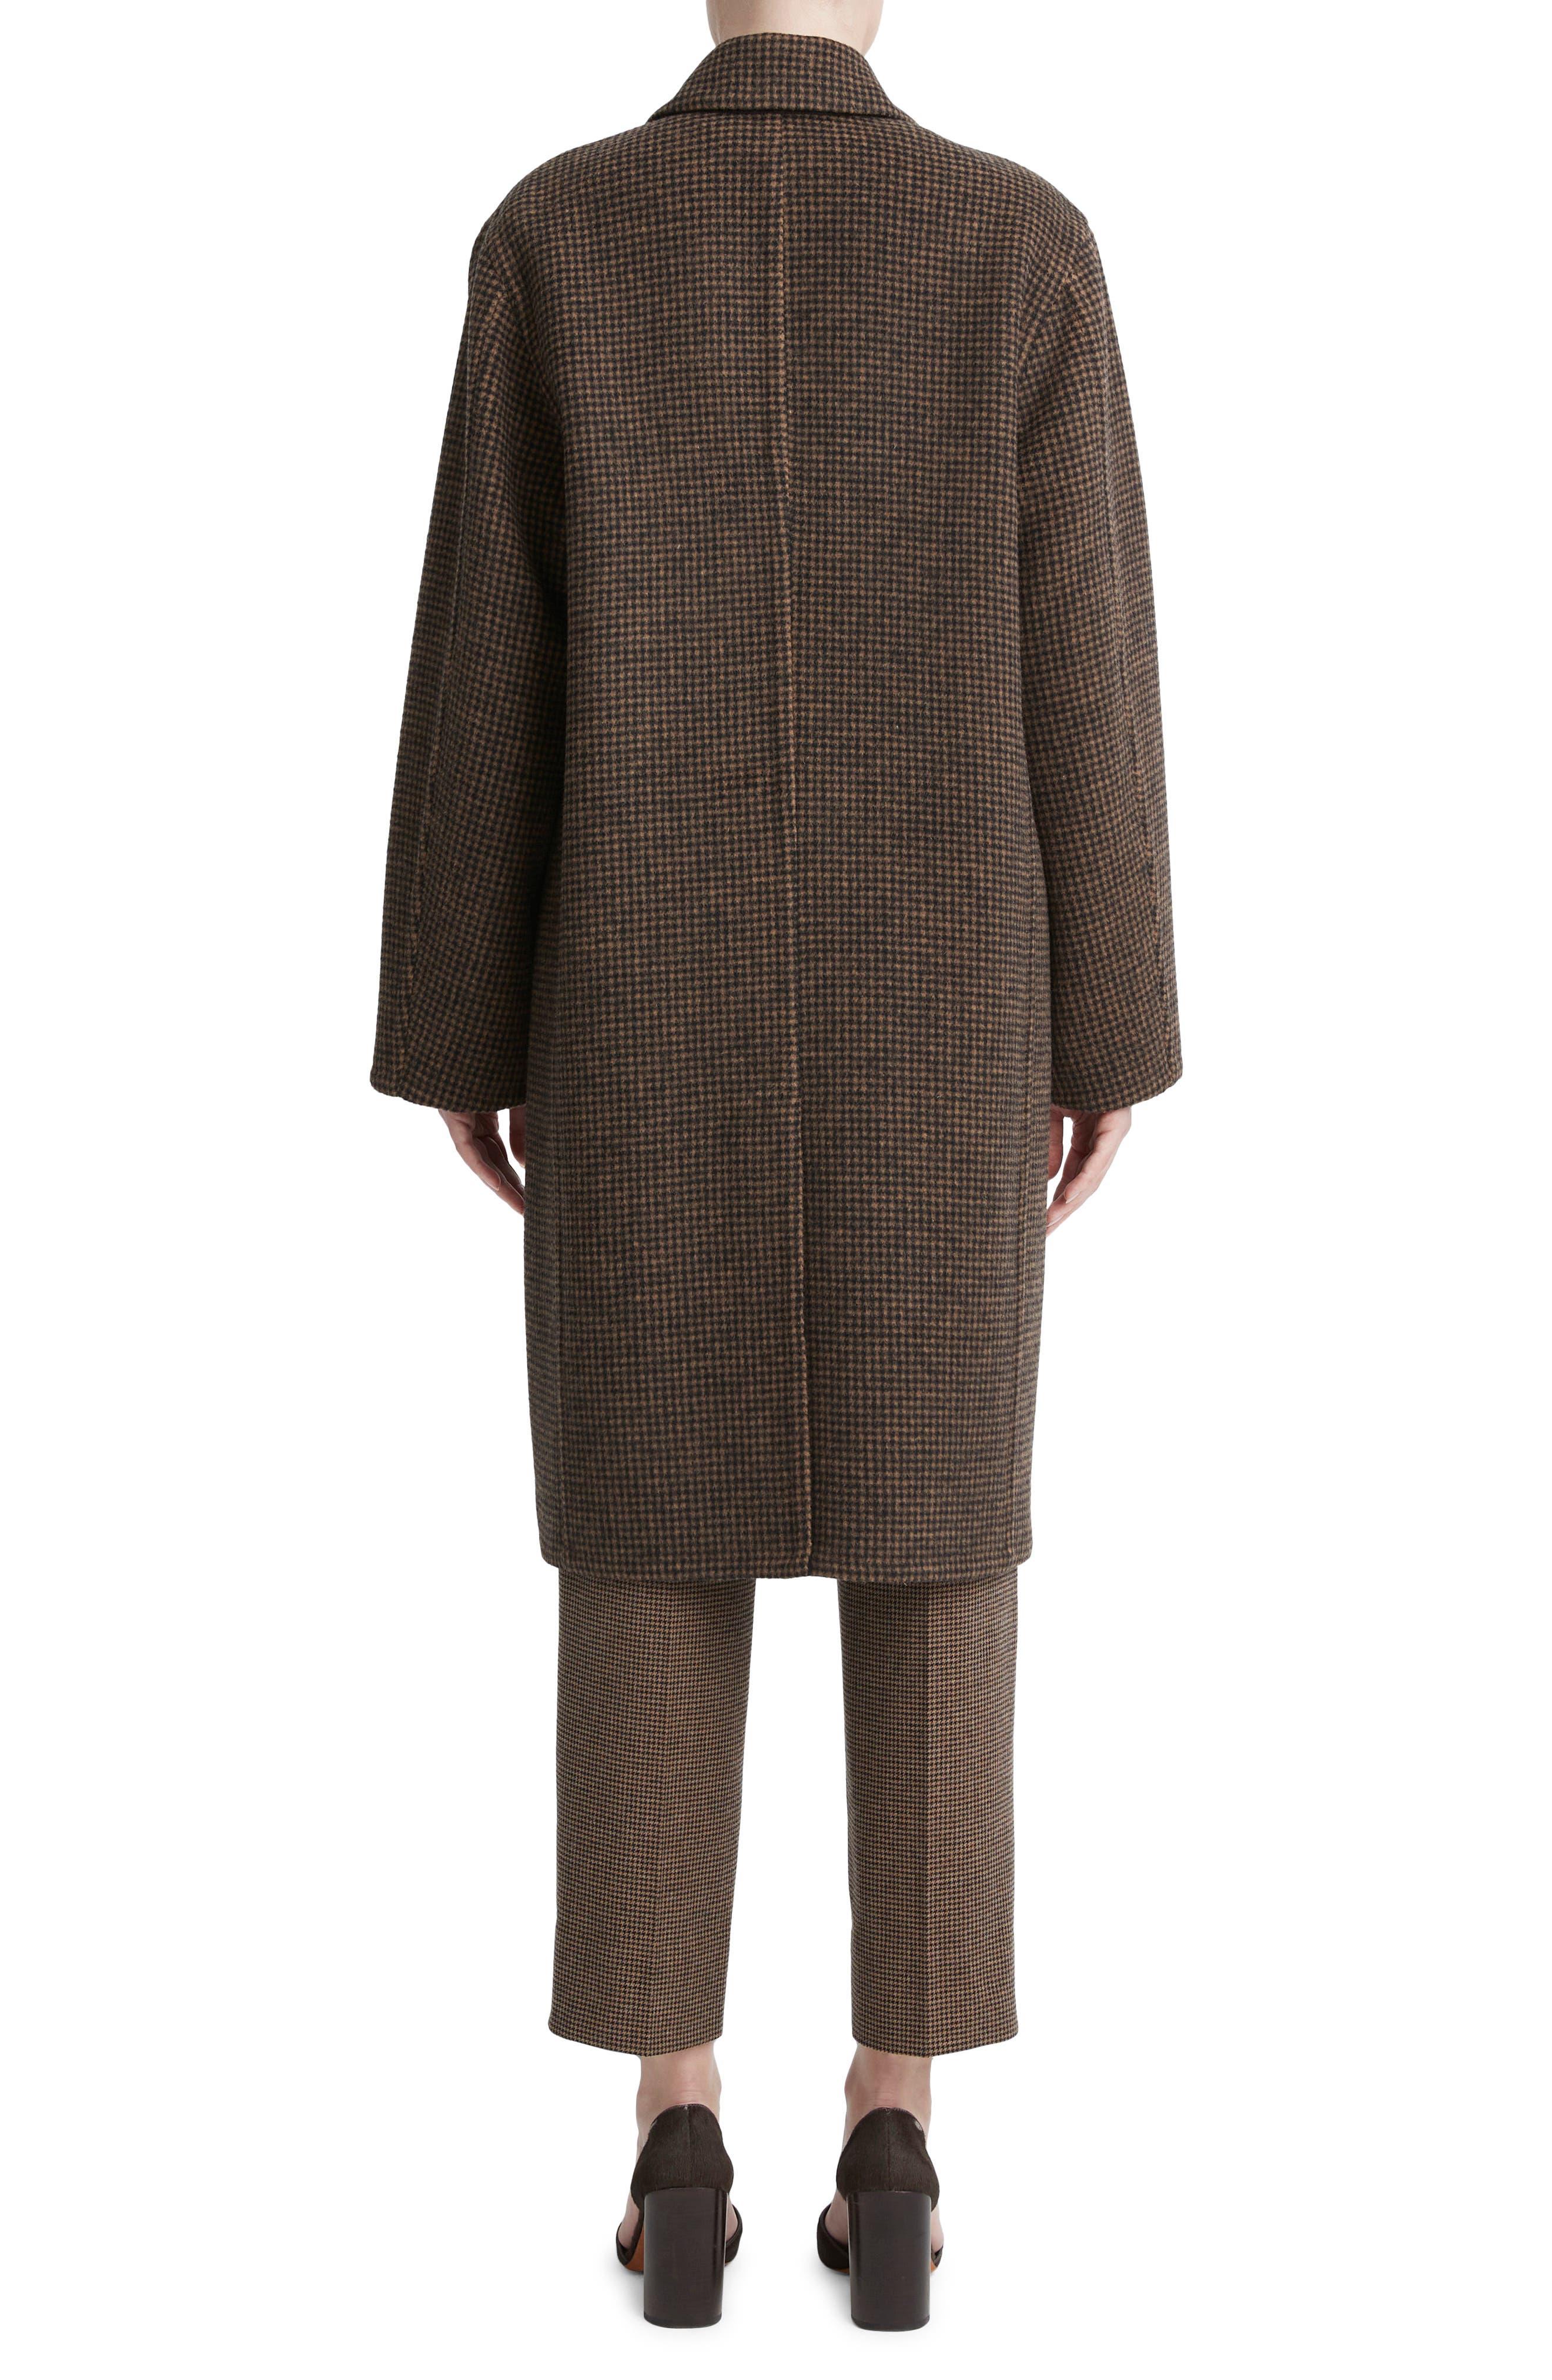 Vince Houndstooth Check Recycled Wool Blend Coat in Brown | Lyst